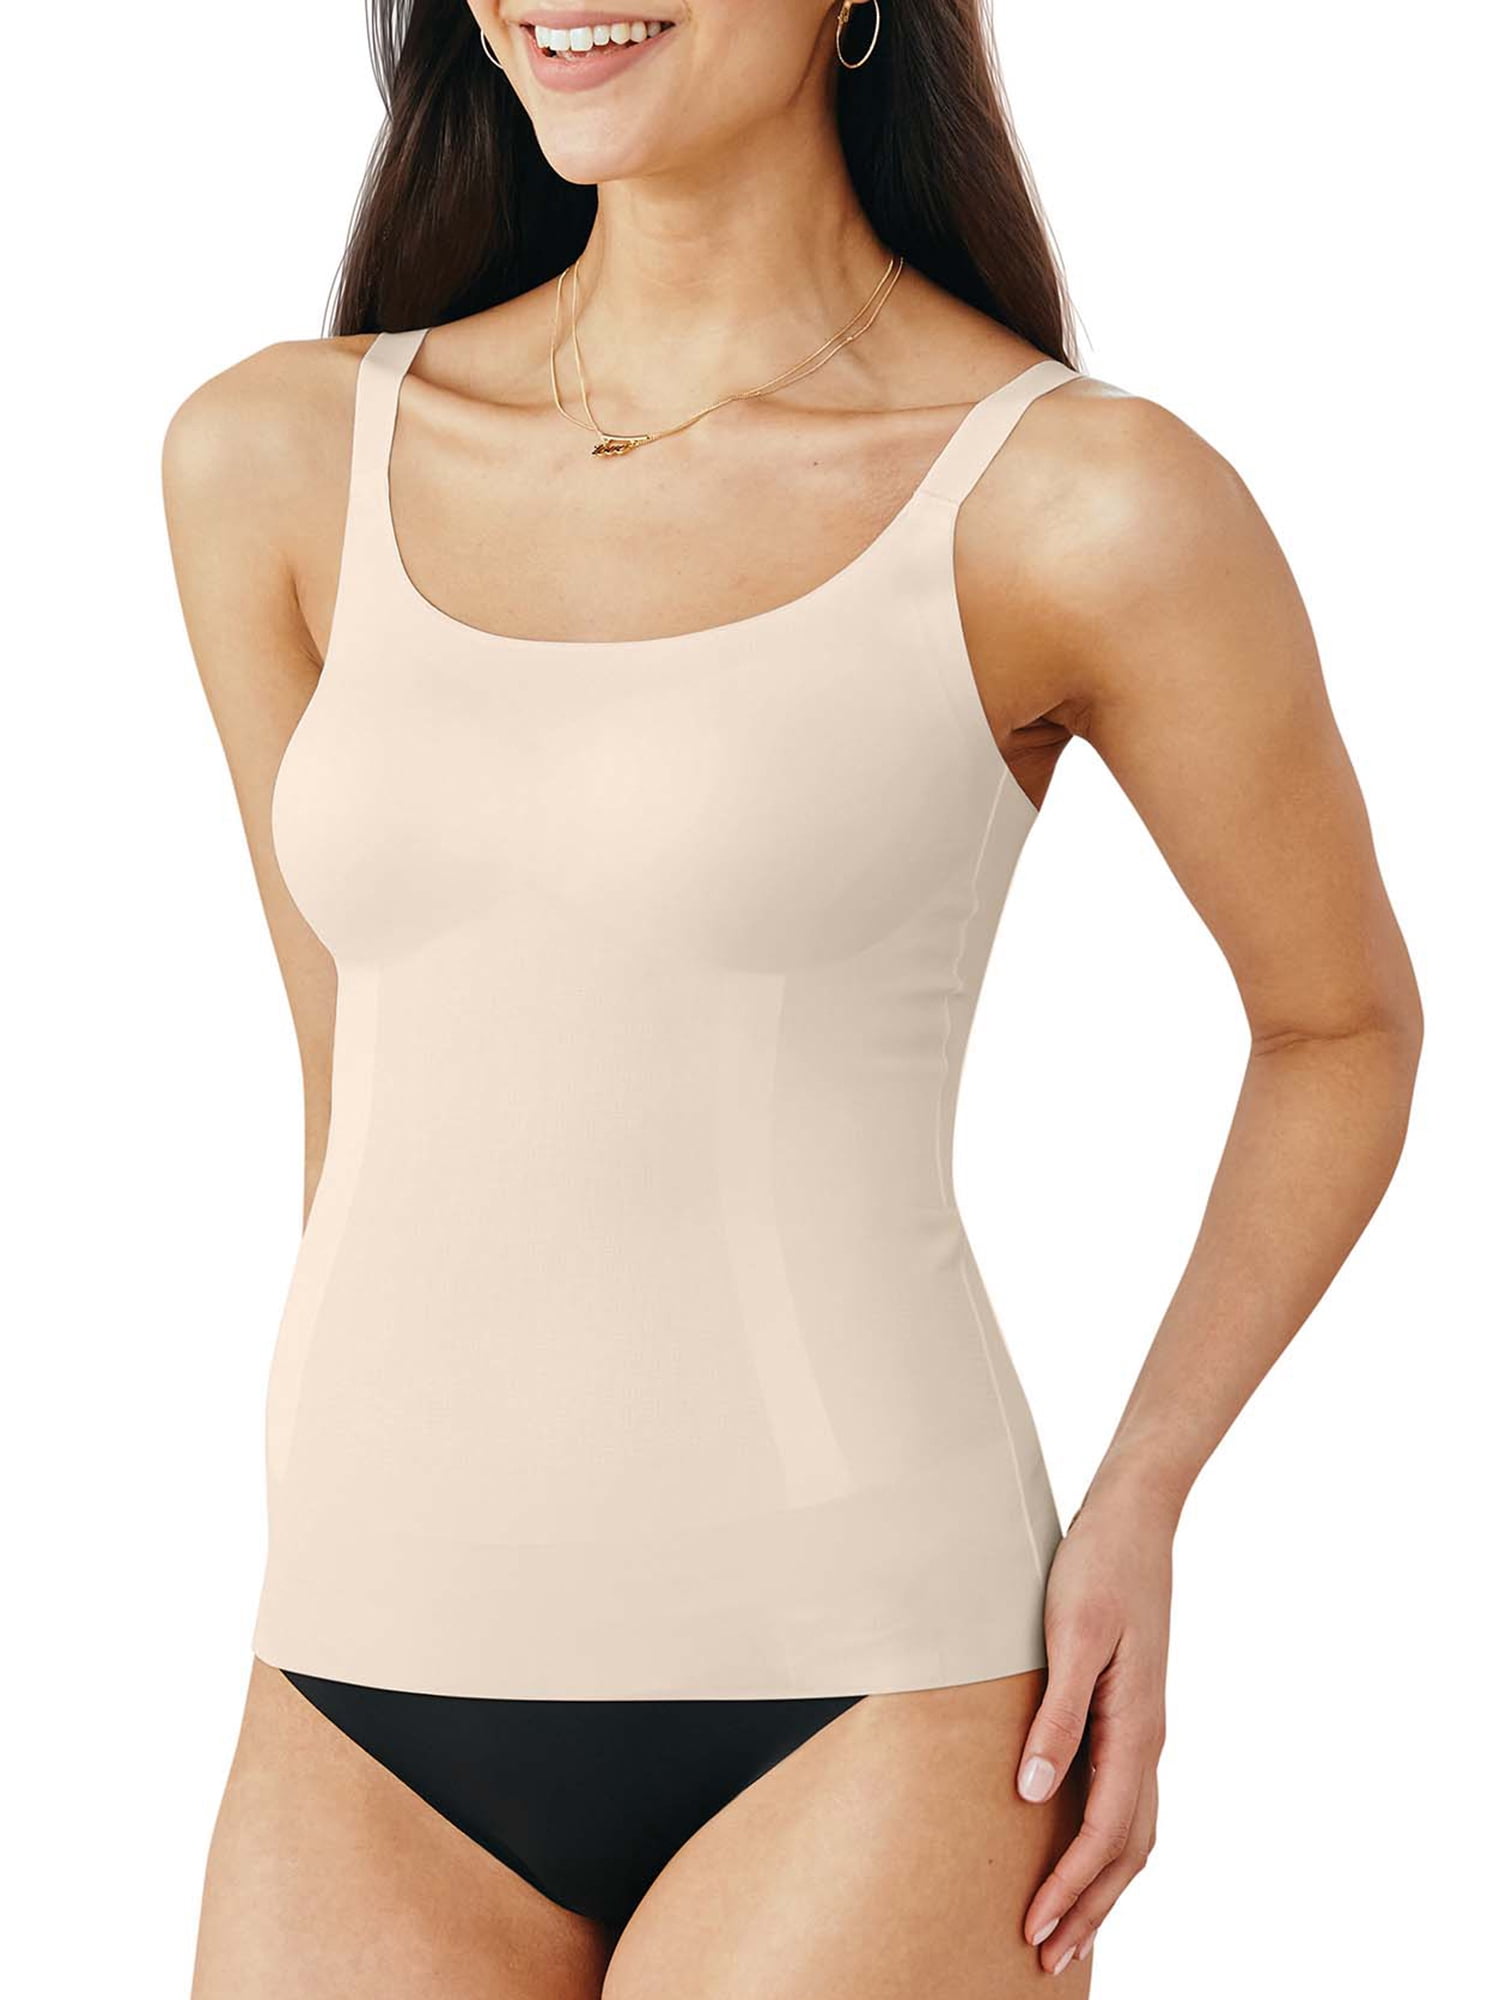 Maidenform Women's Shapewear Firm Control Power Players Shaping Cami -  Style DMS086 